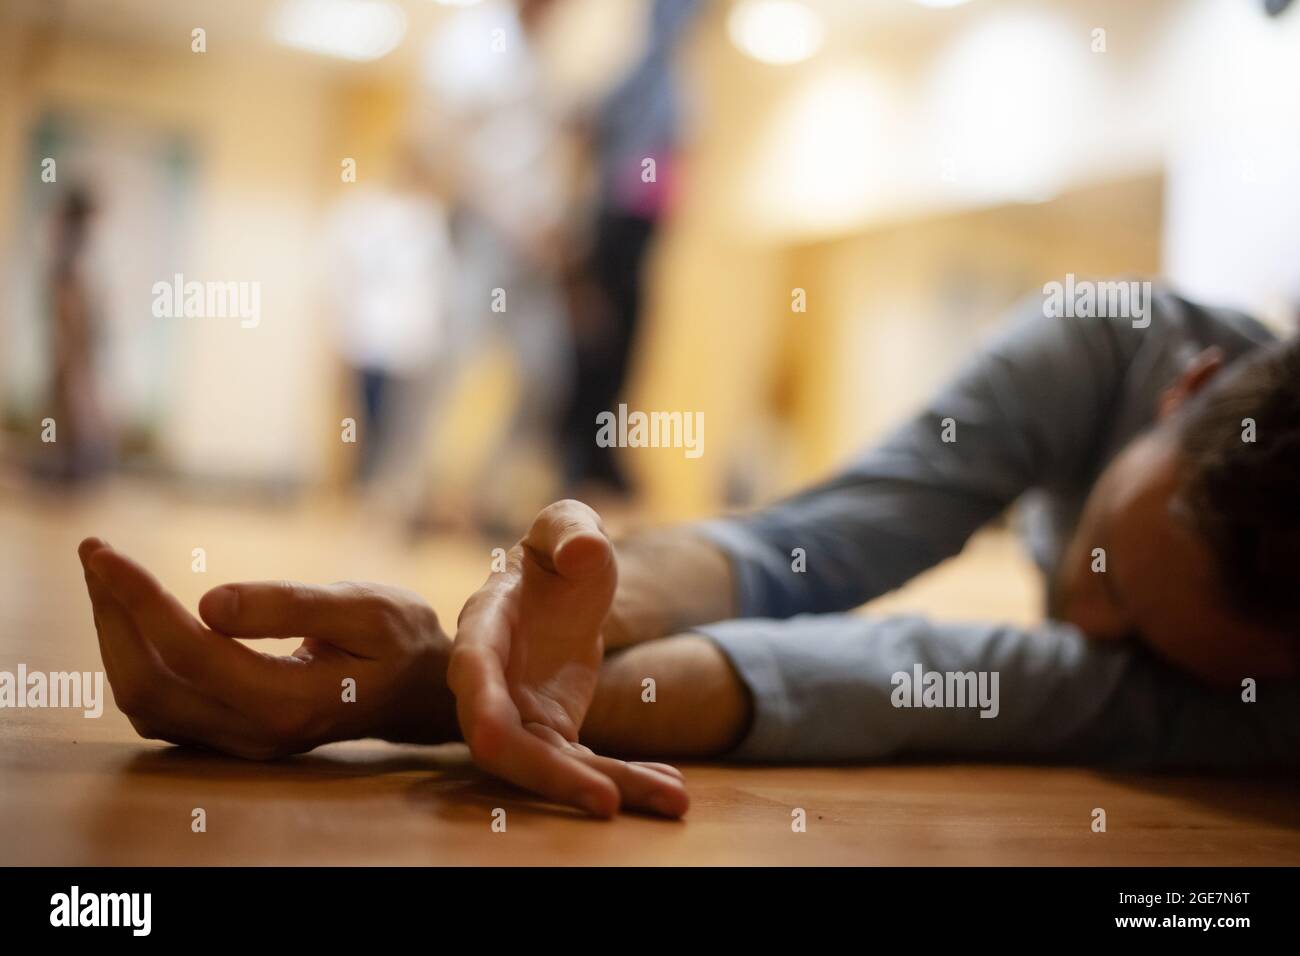 dancer laying on floor dancers improvise in contact Stock Photo